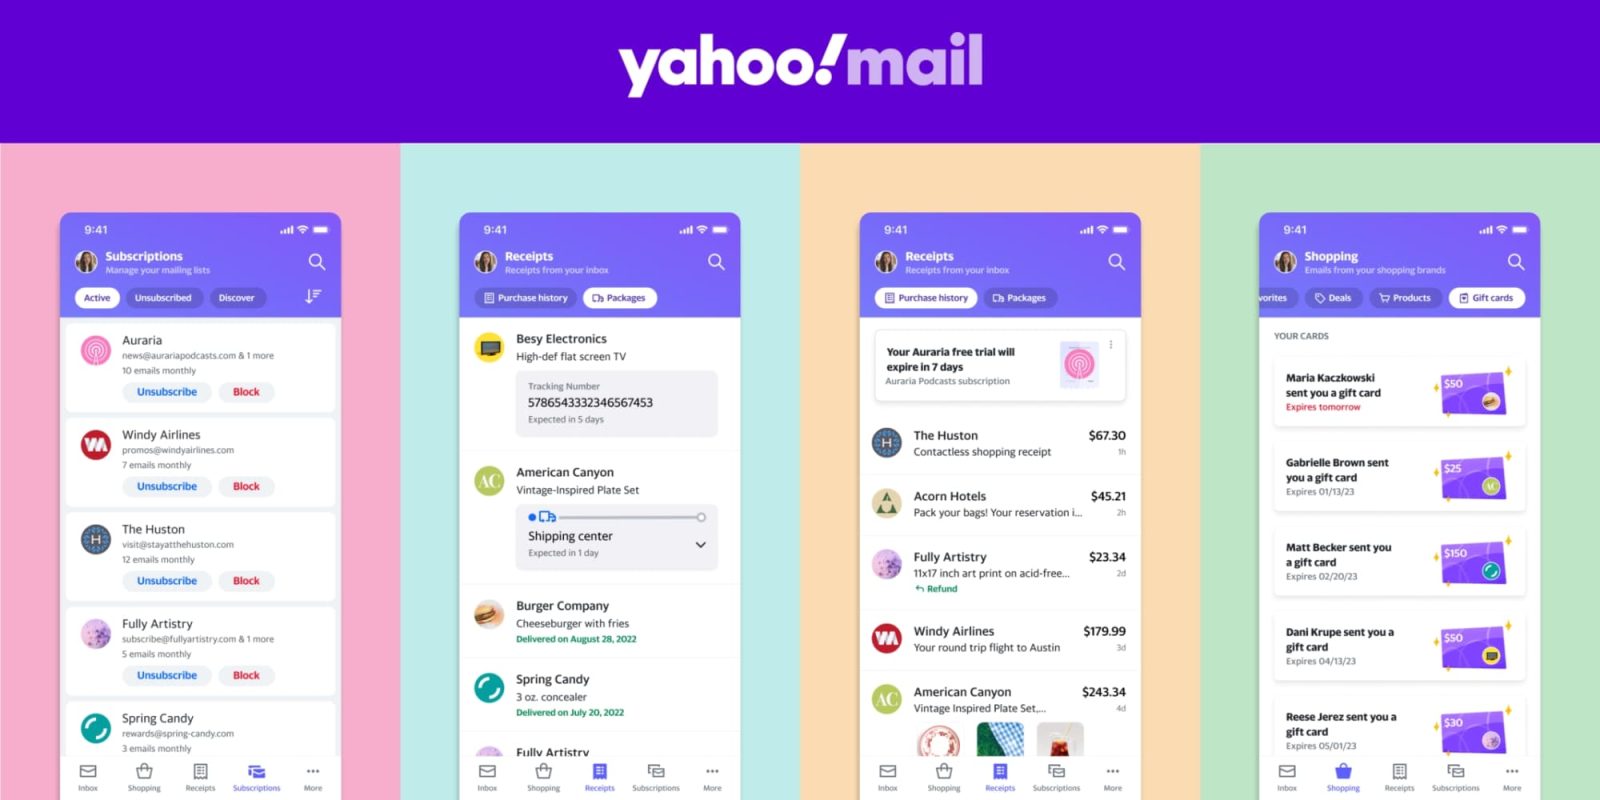 Should I upgrade to Ymail?